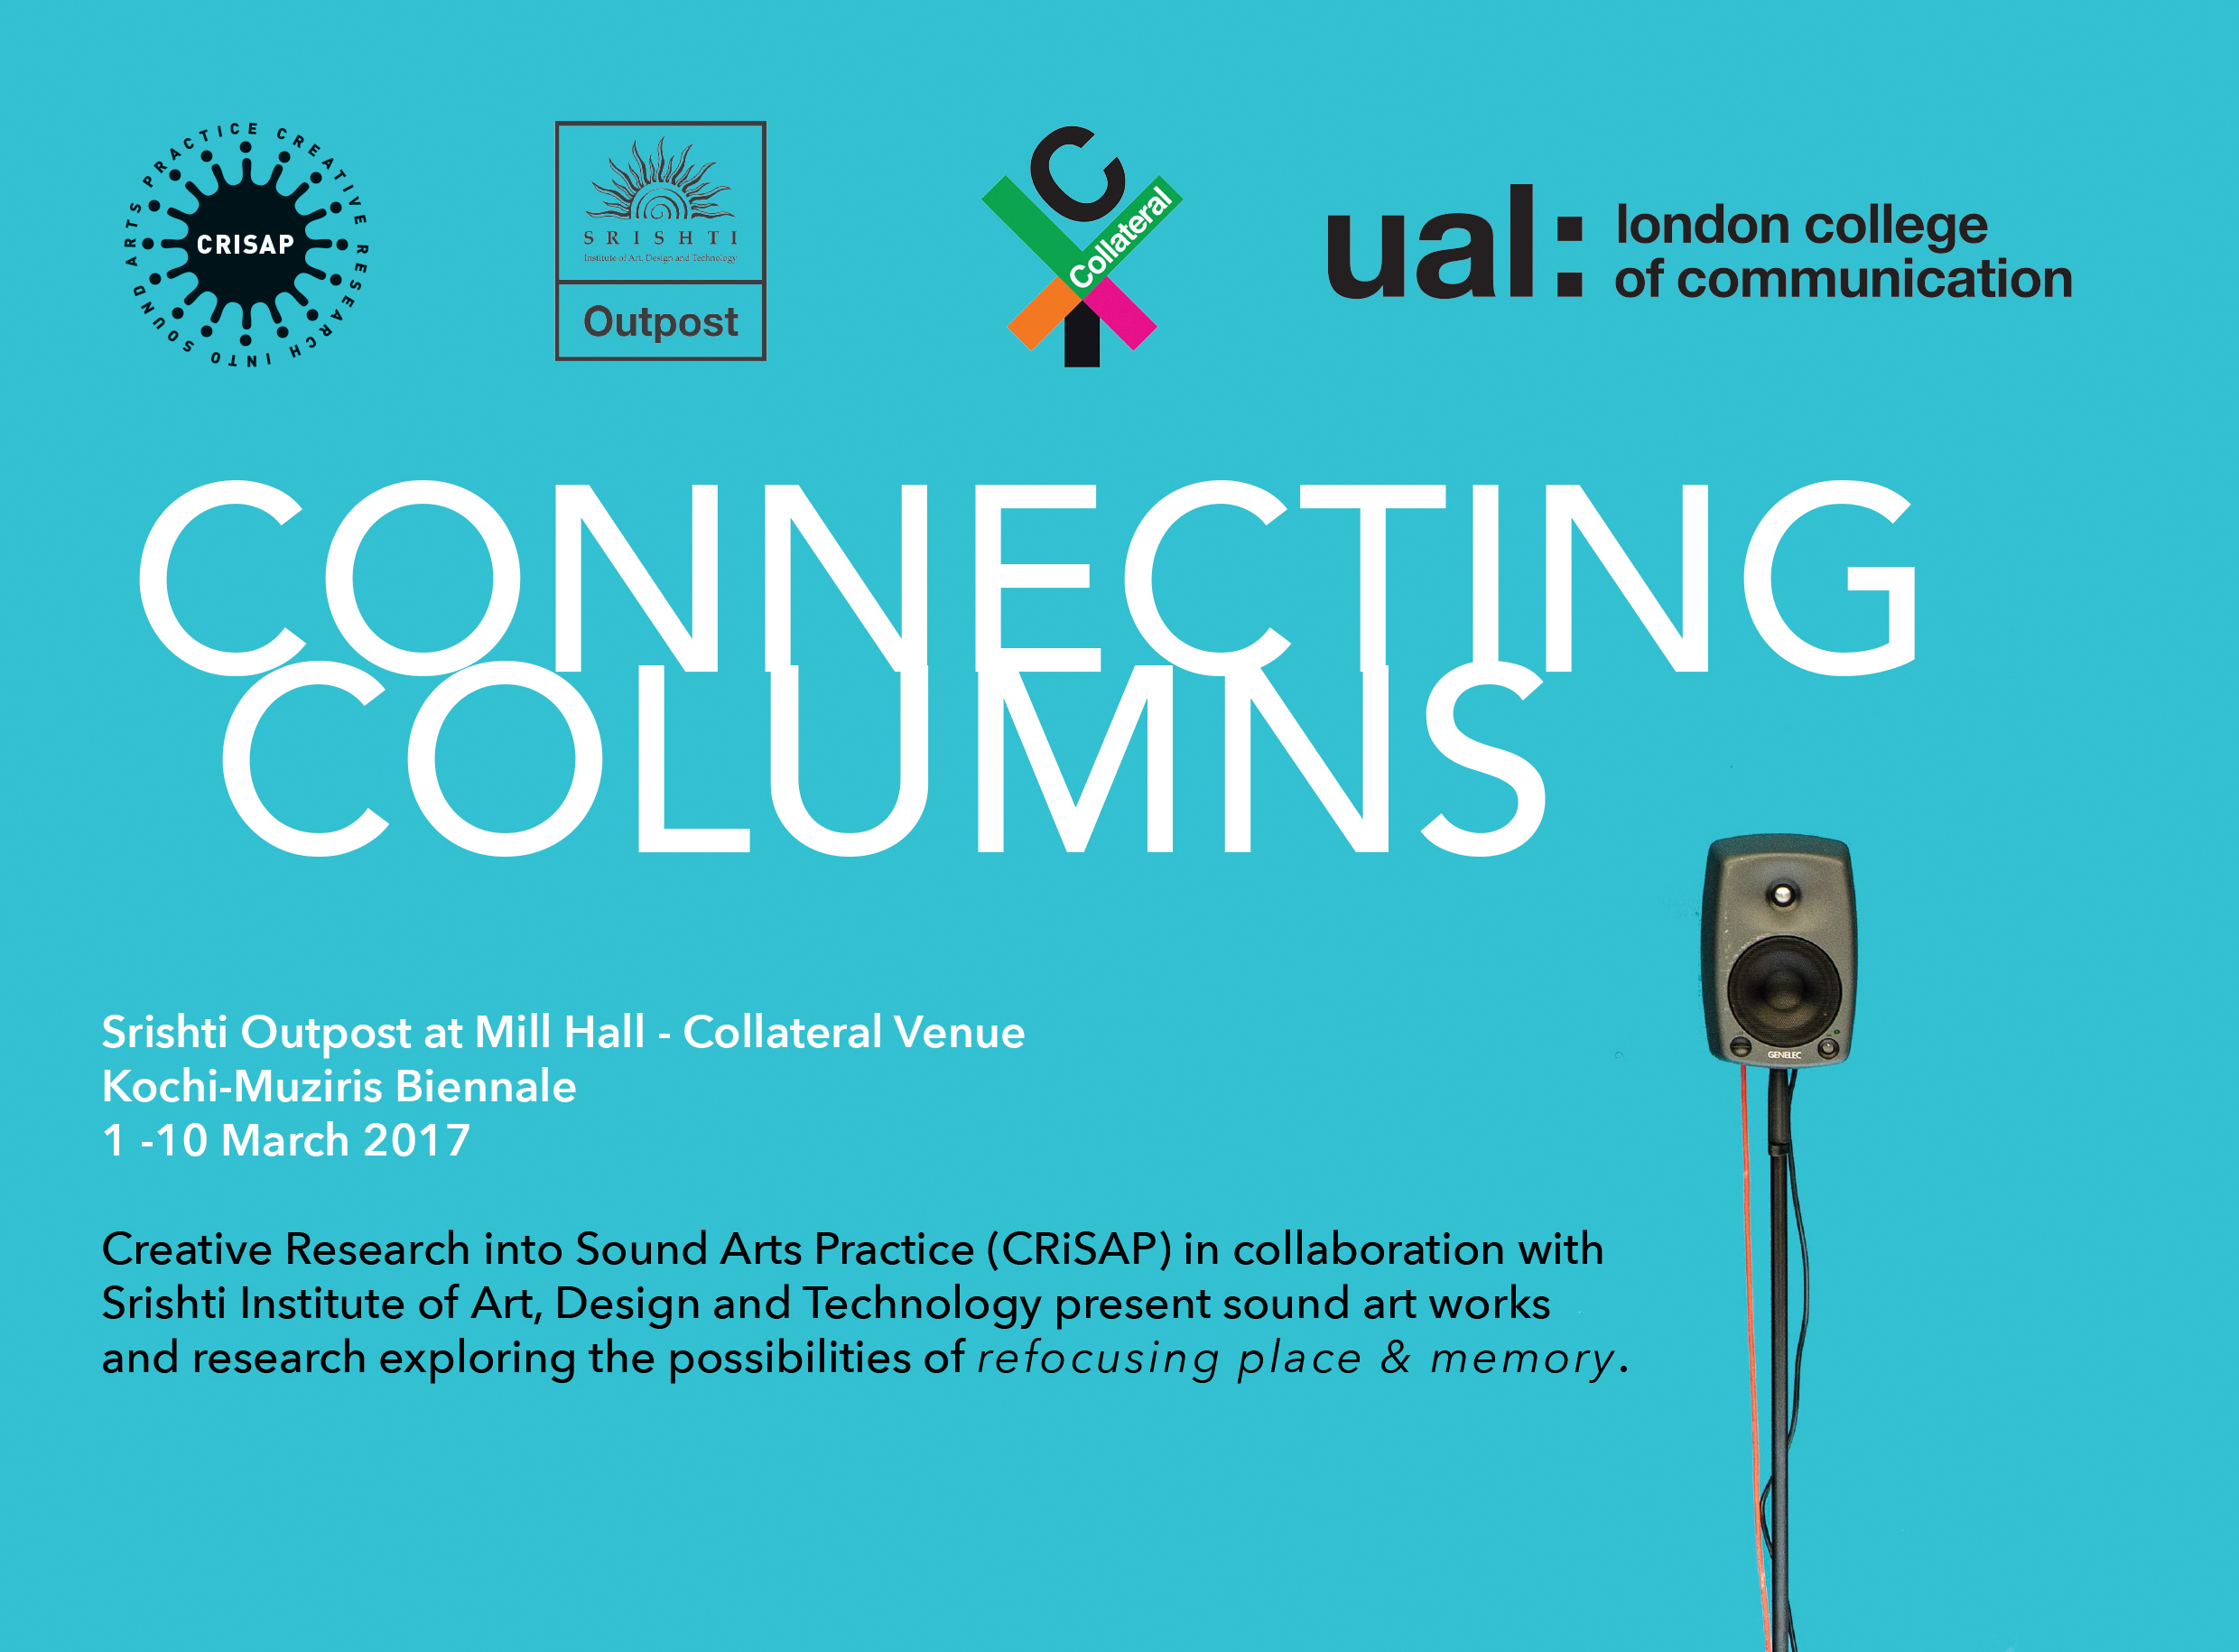 Poster "Connecting Columns" with location. logo and description